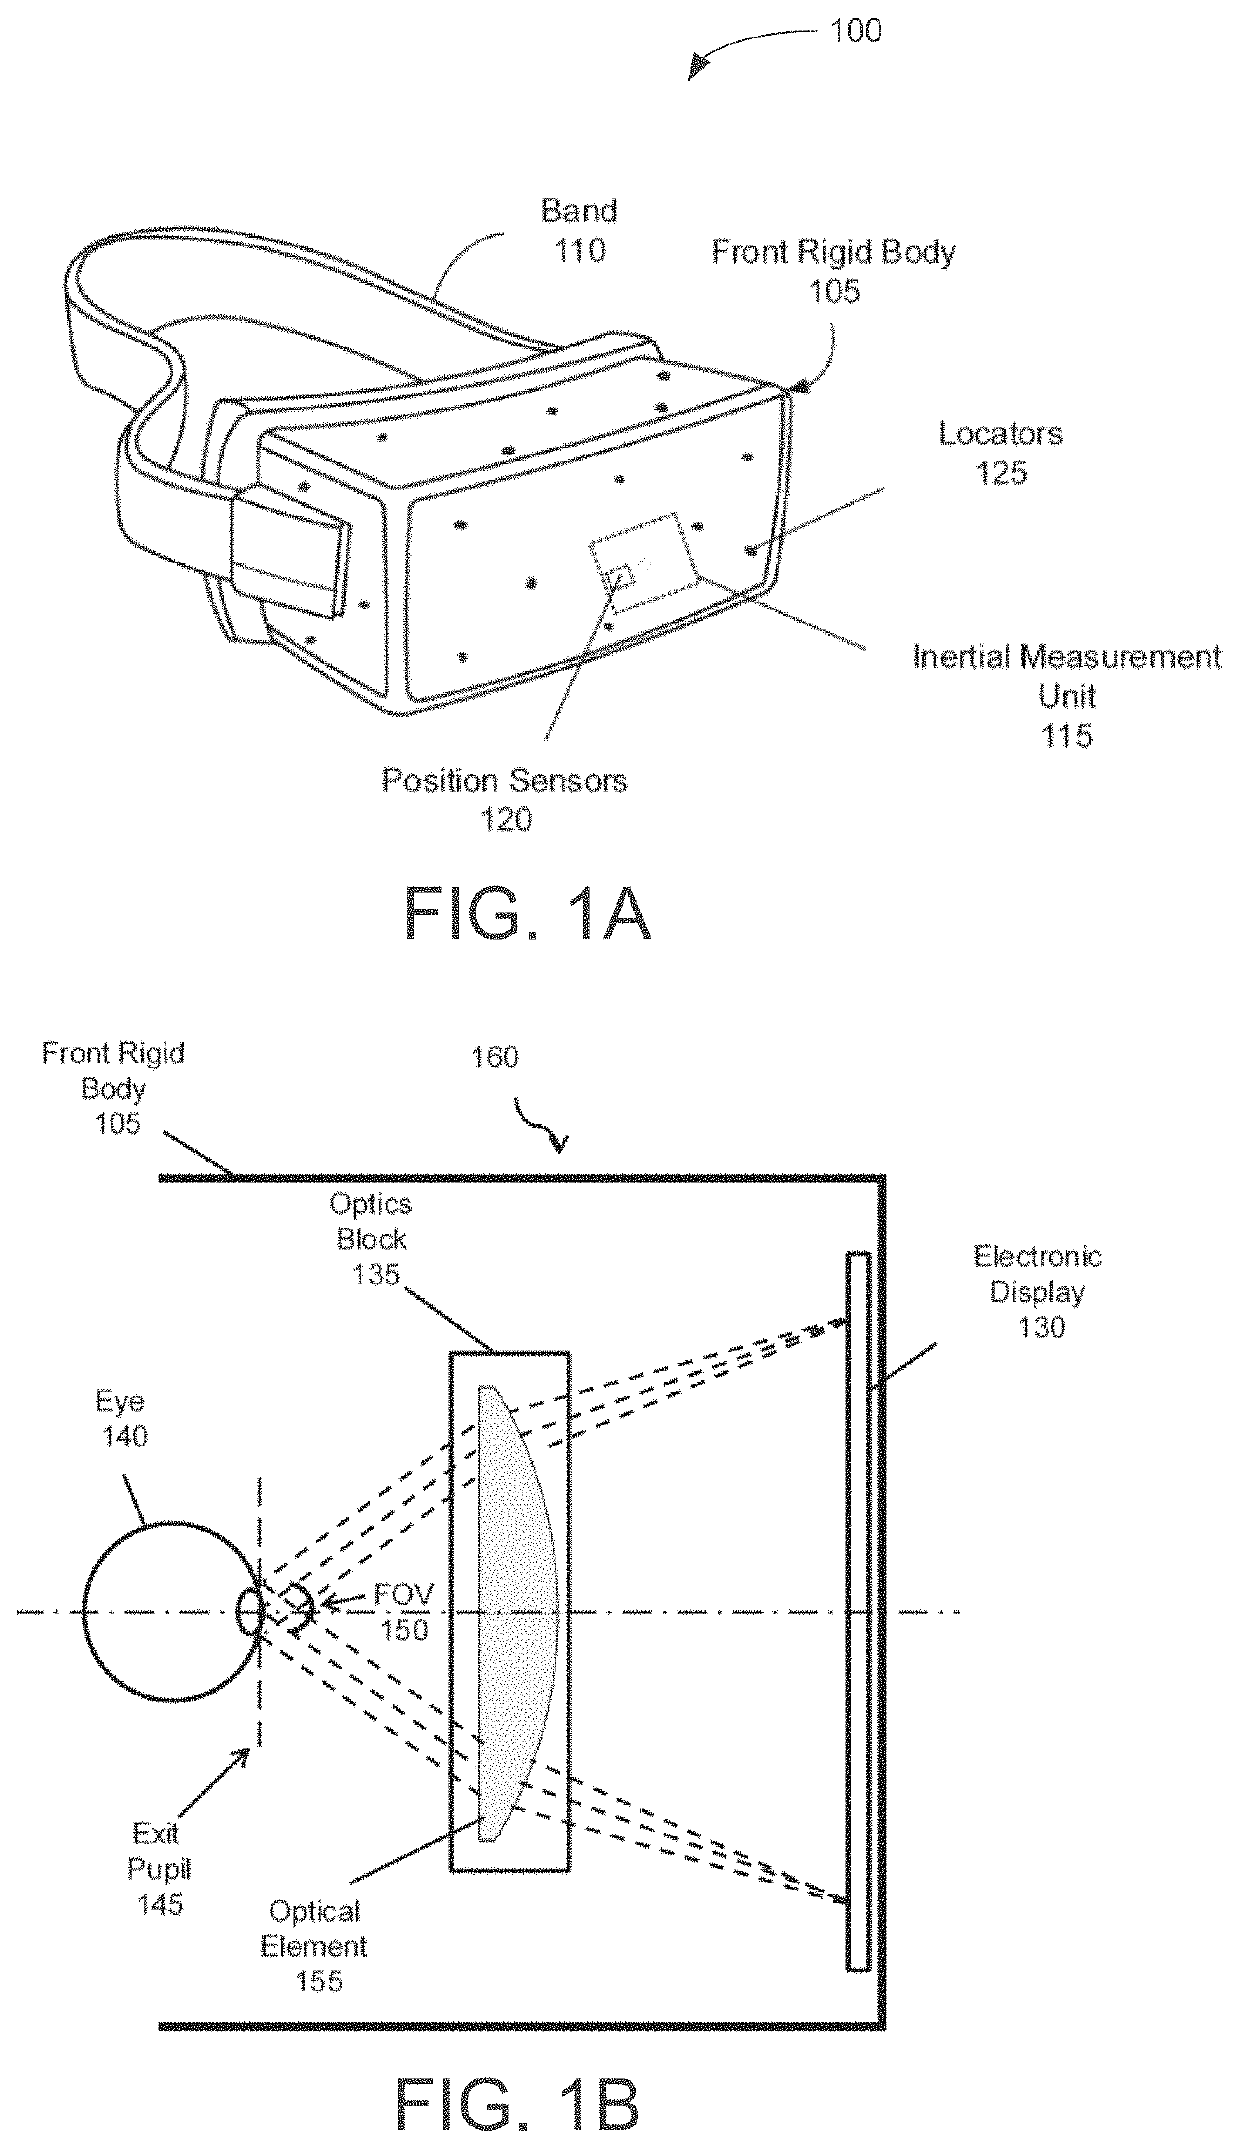 Foveated display system